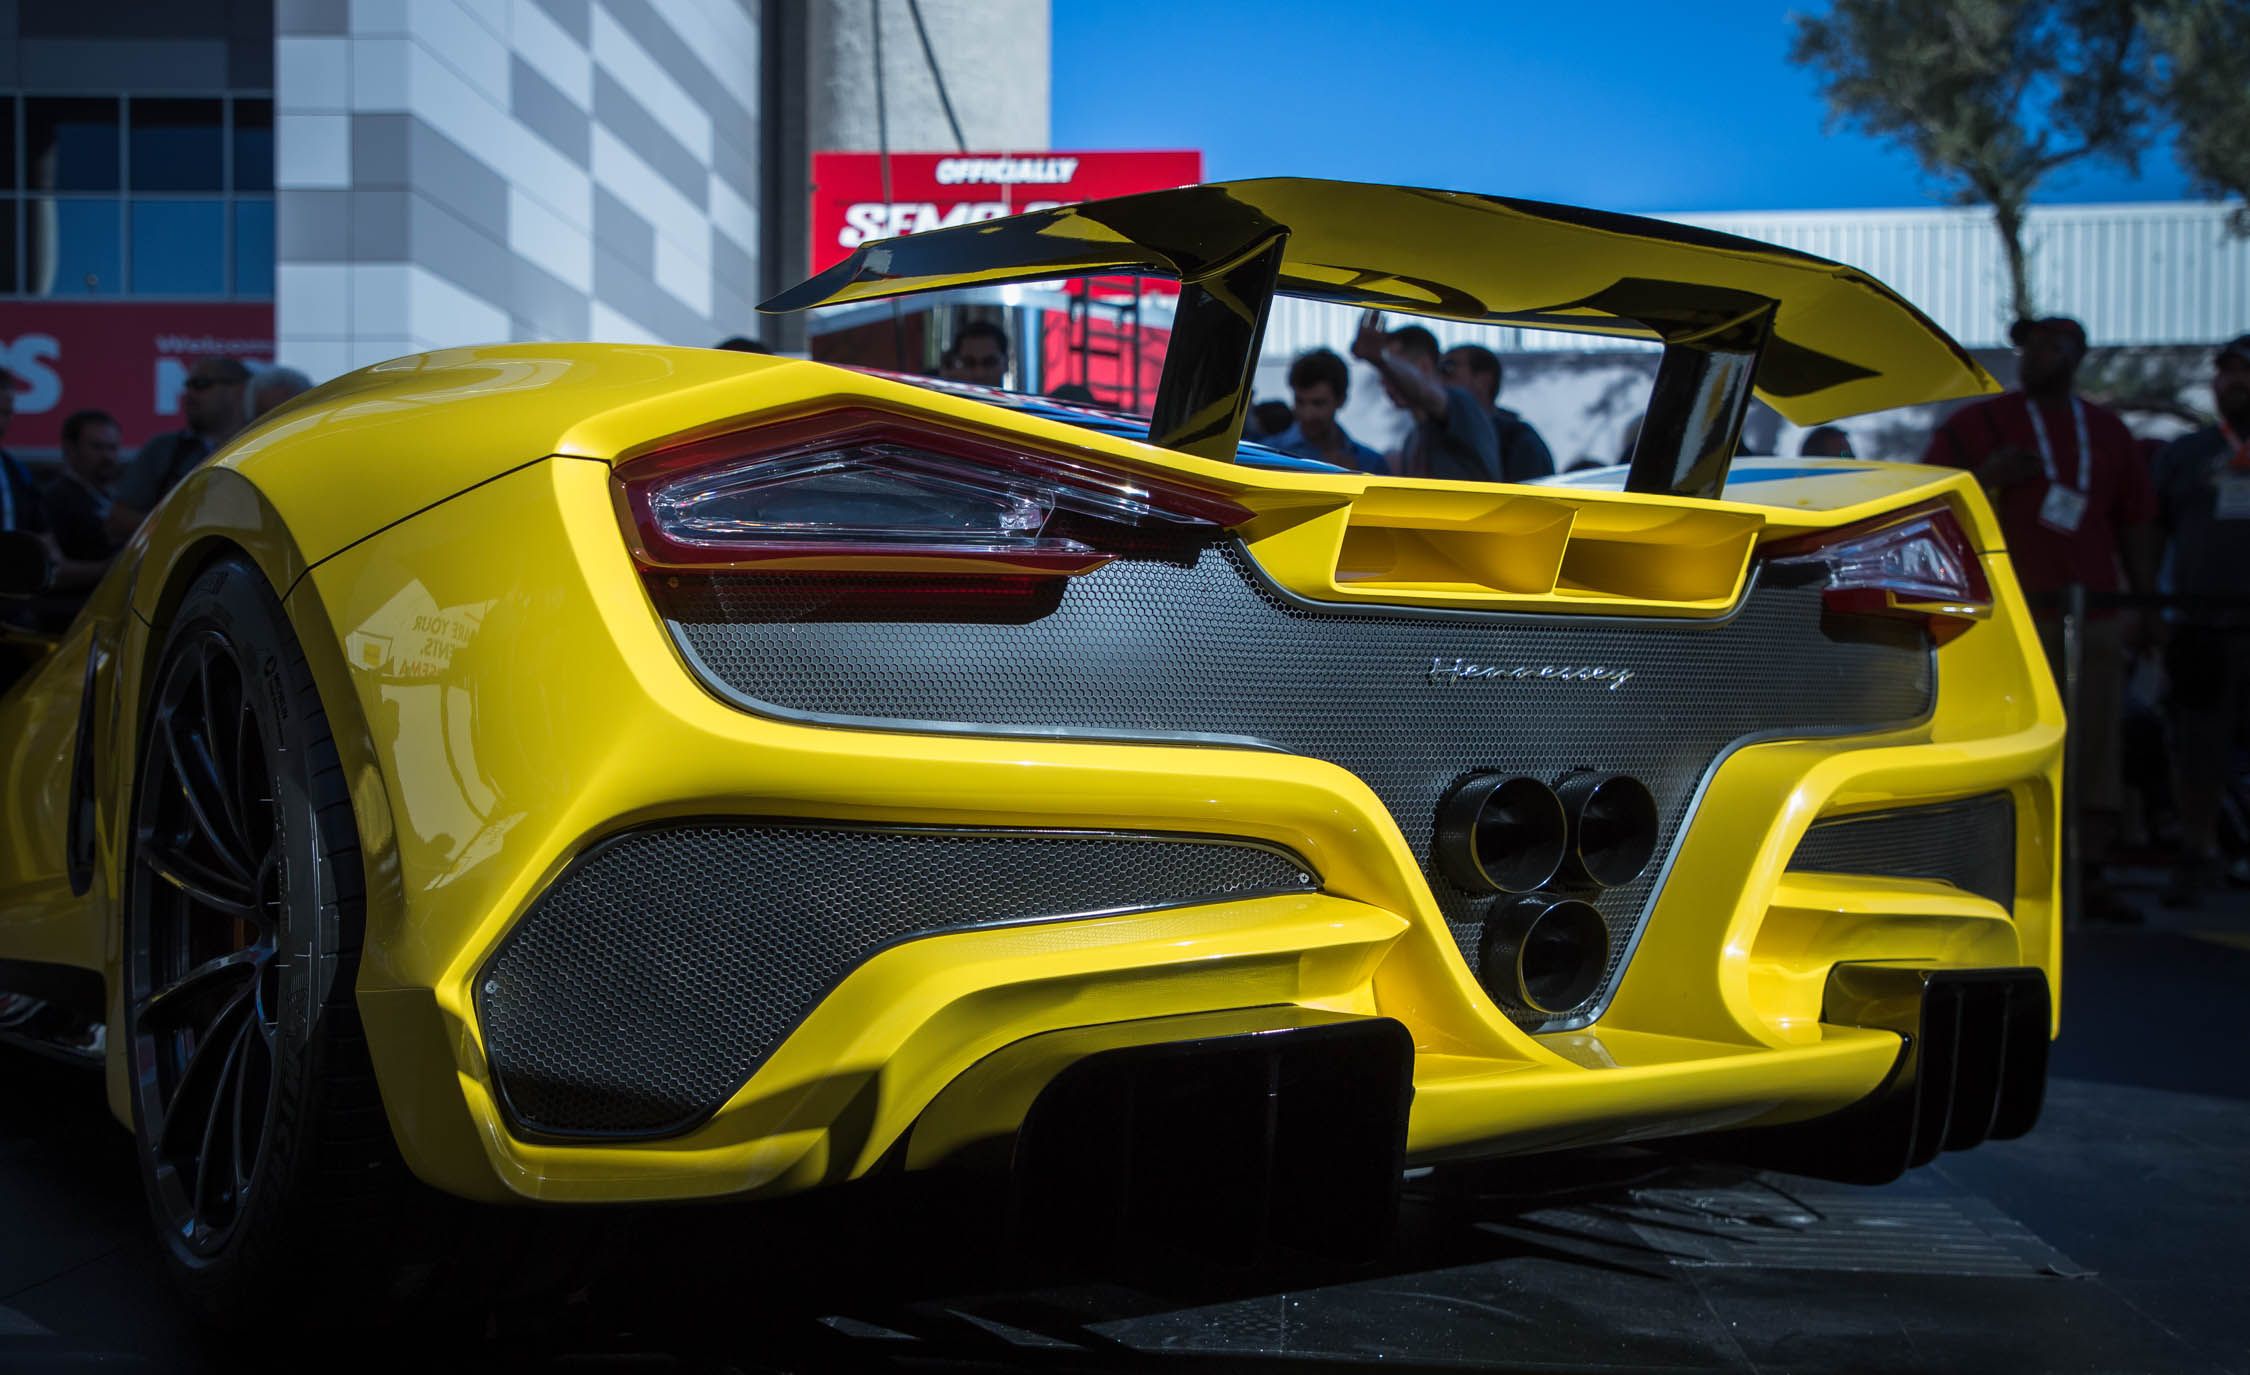 Why the Hennessey Venom F5 is a Genuine 300 mph Contender